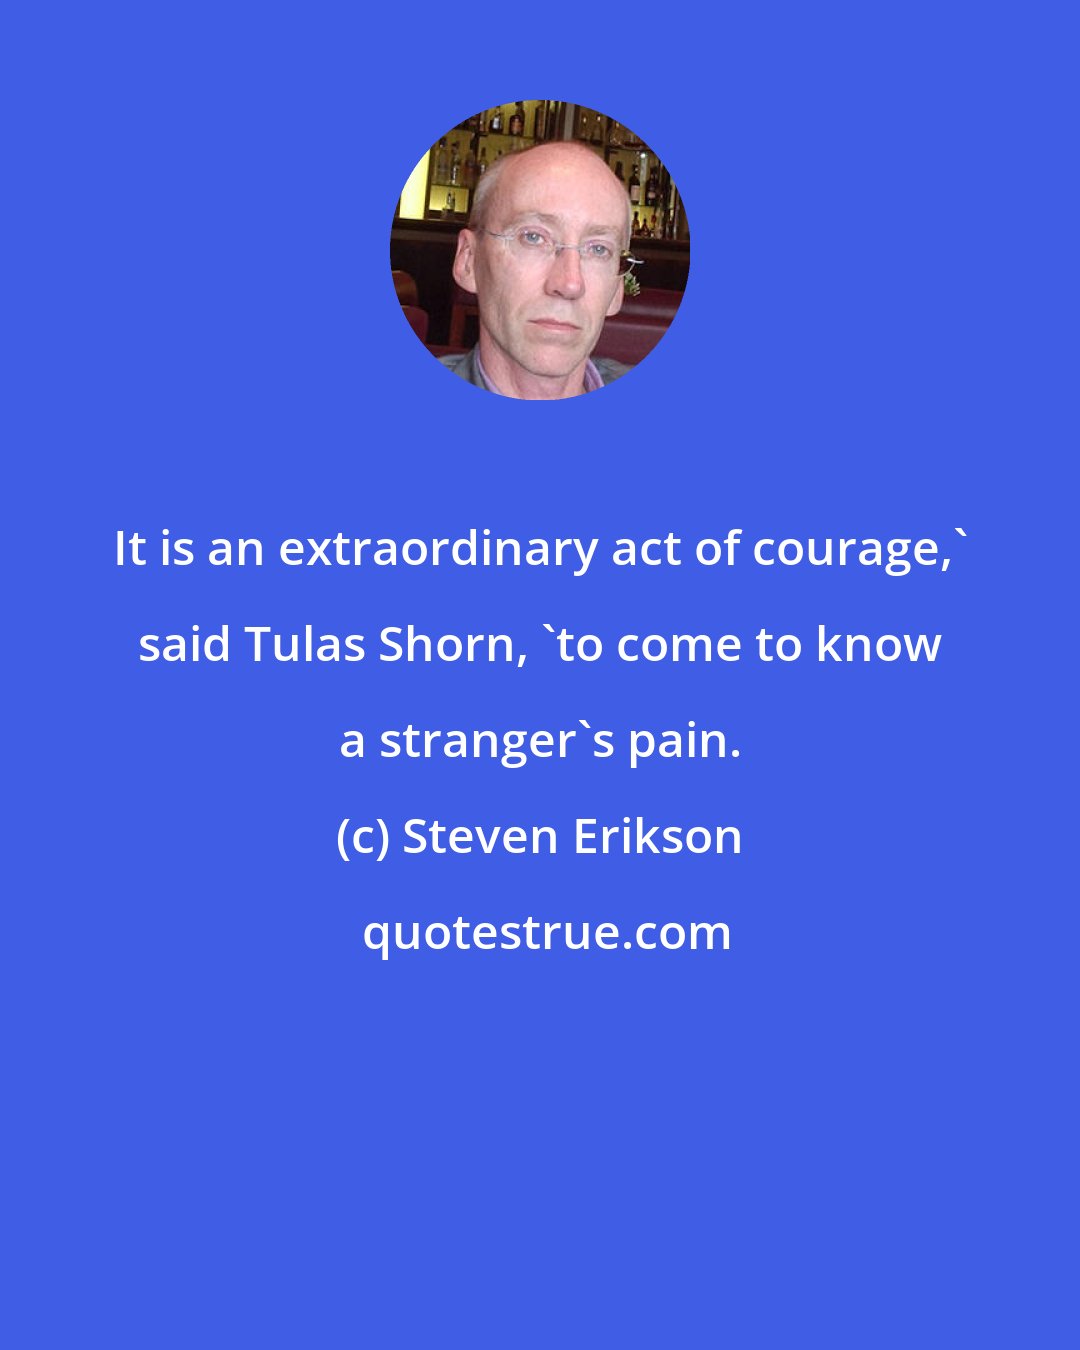 Steven Erikson: It is an extraordinary act of courage,' said Tulas Shorn, 'to come to know a stranger's pain.